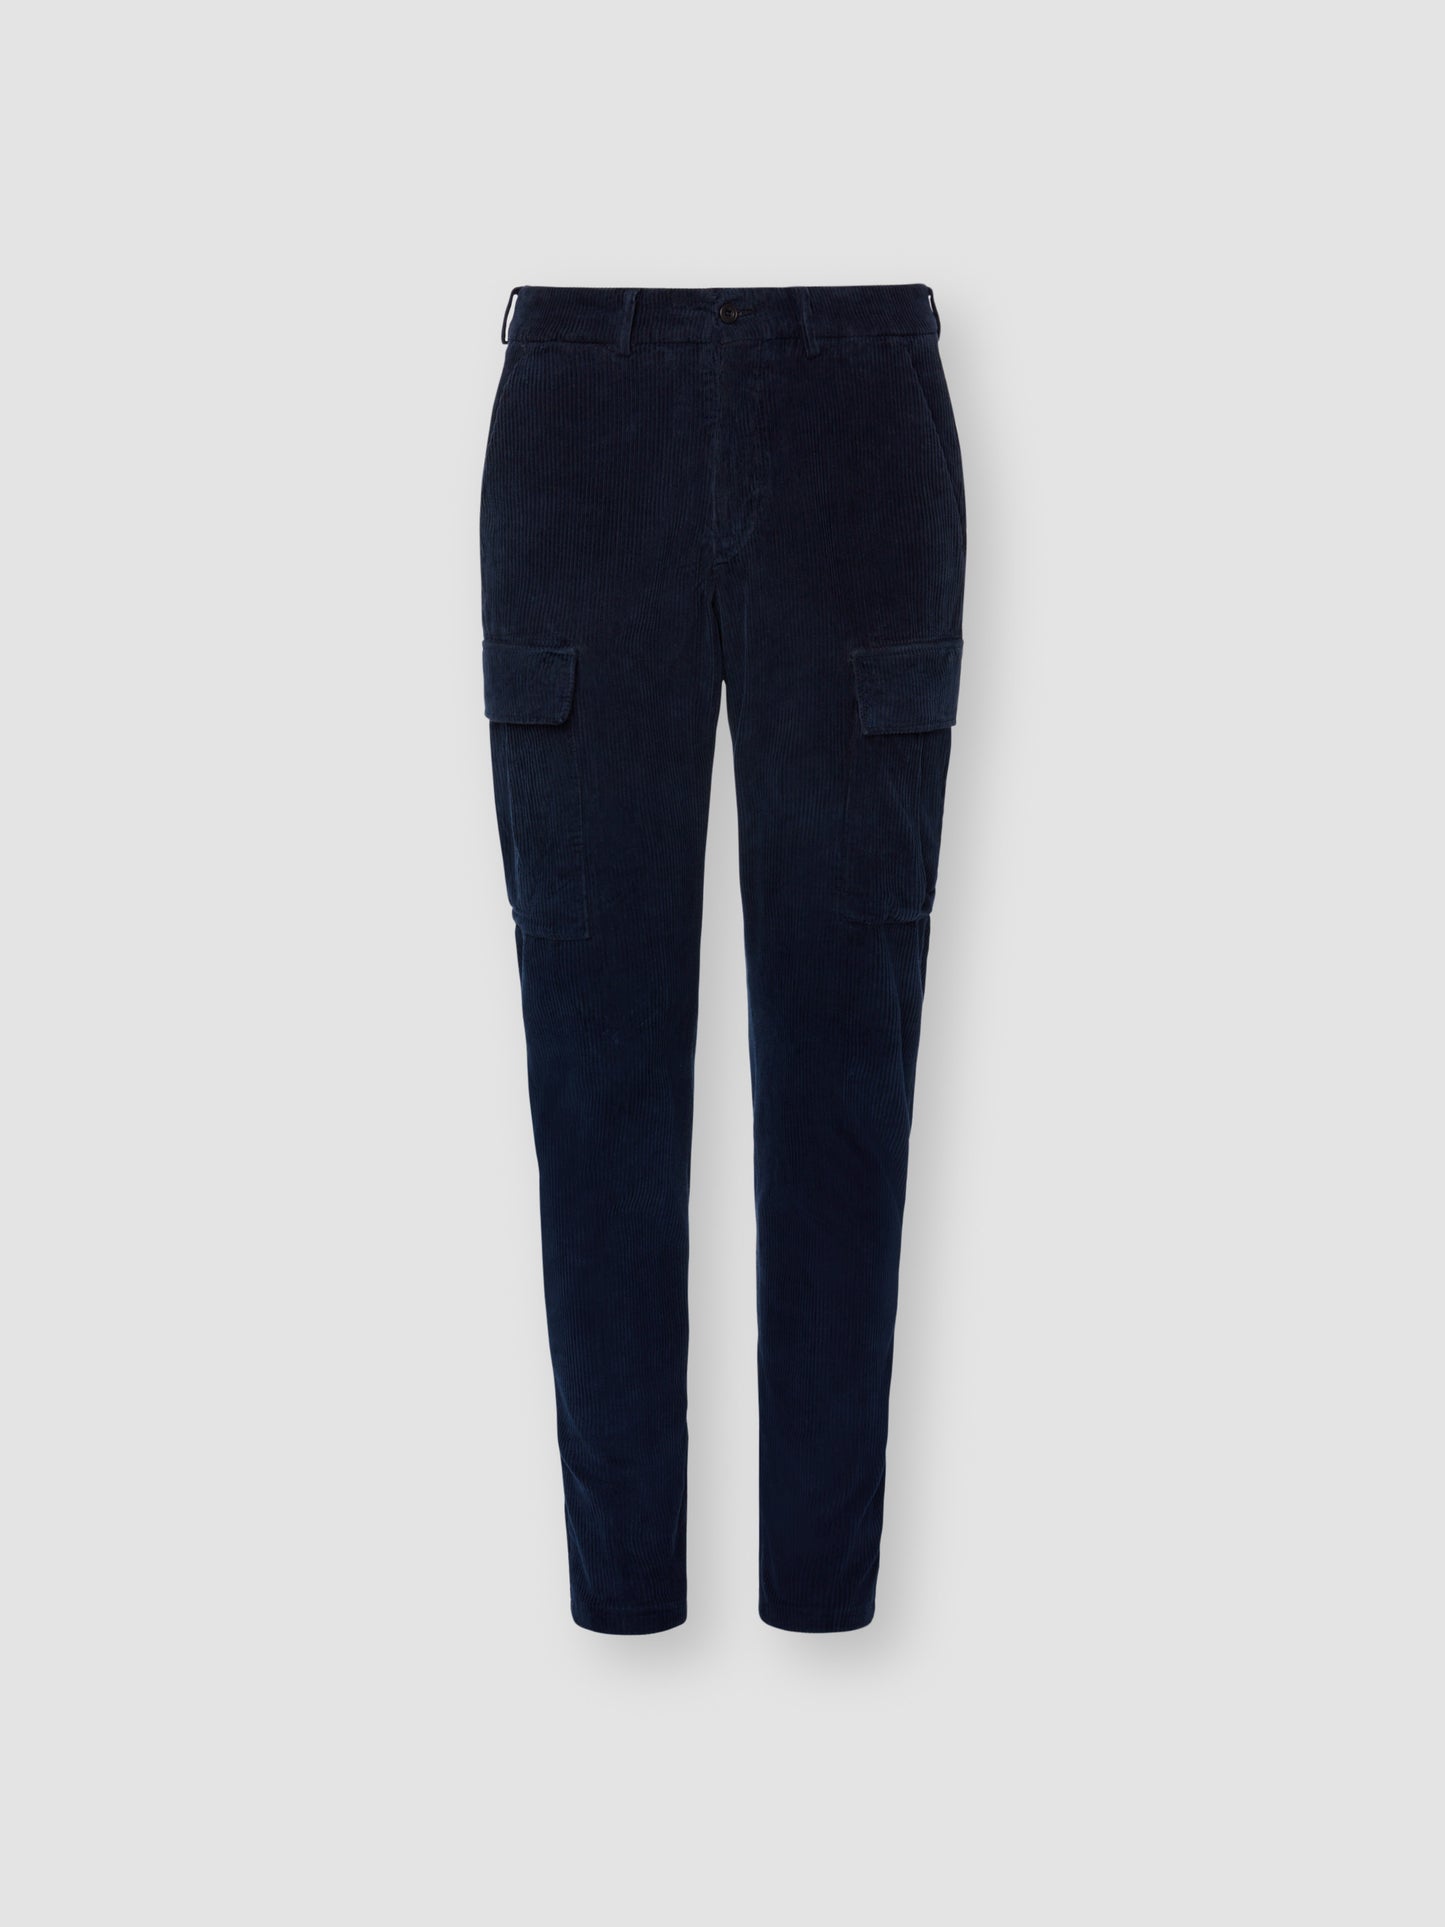 Corduroy Cargo Trousers Navy Product Image